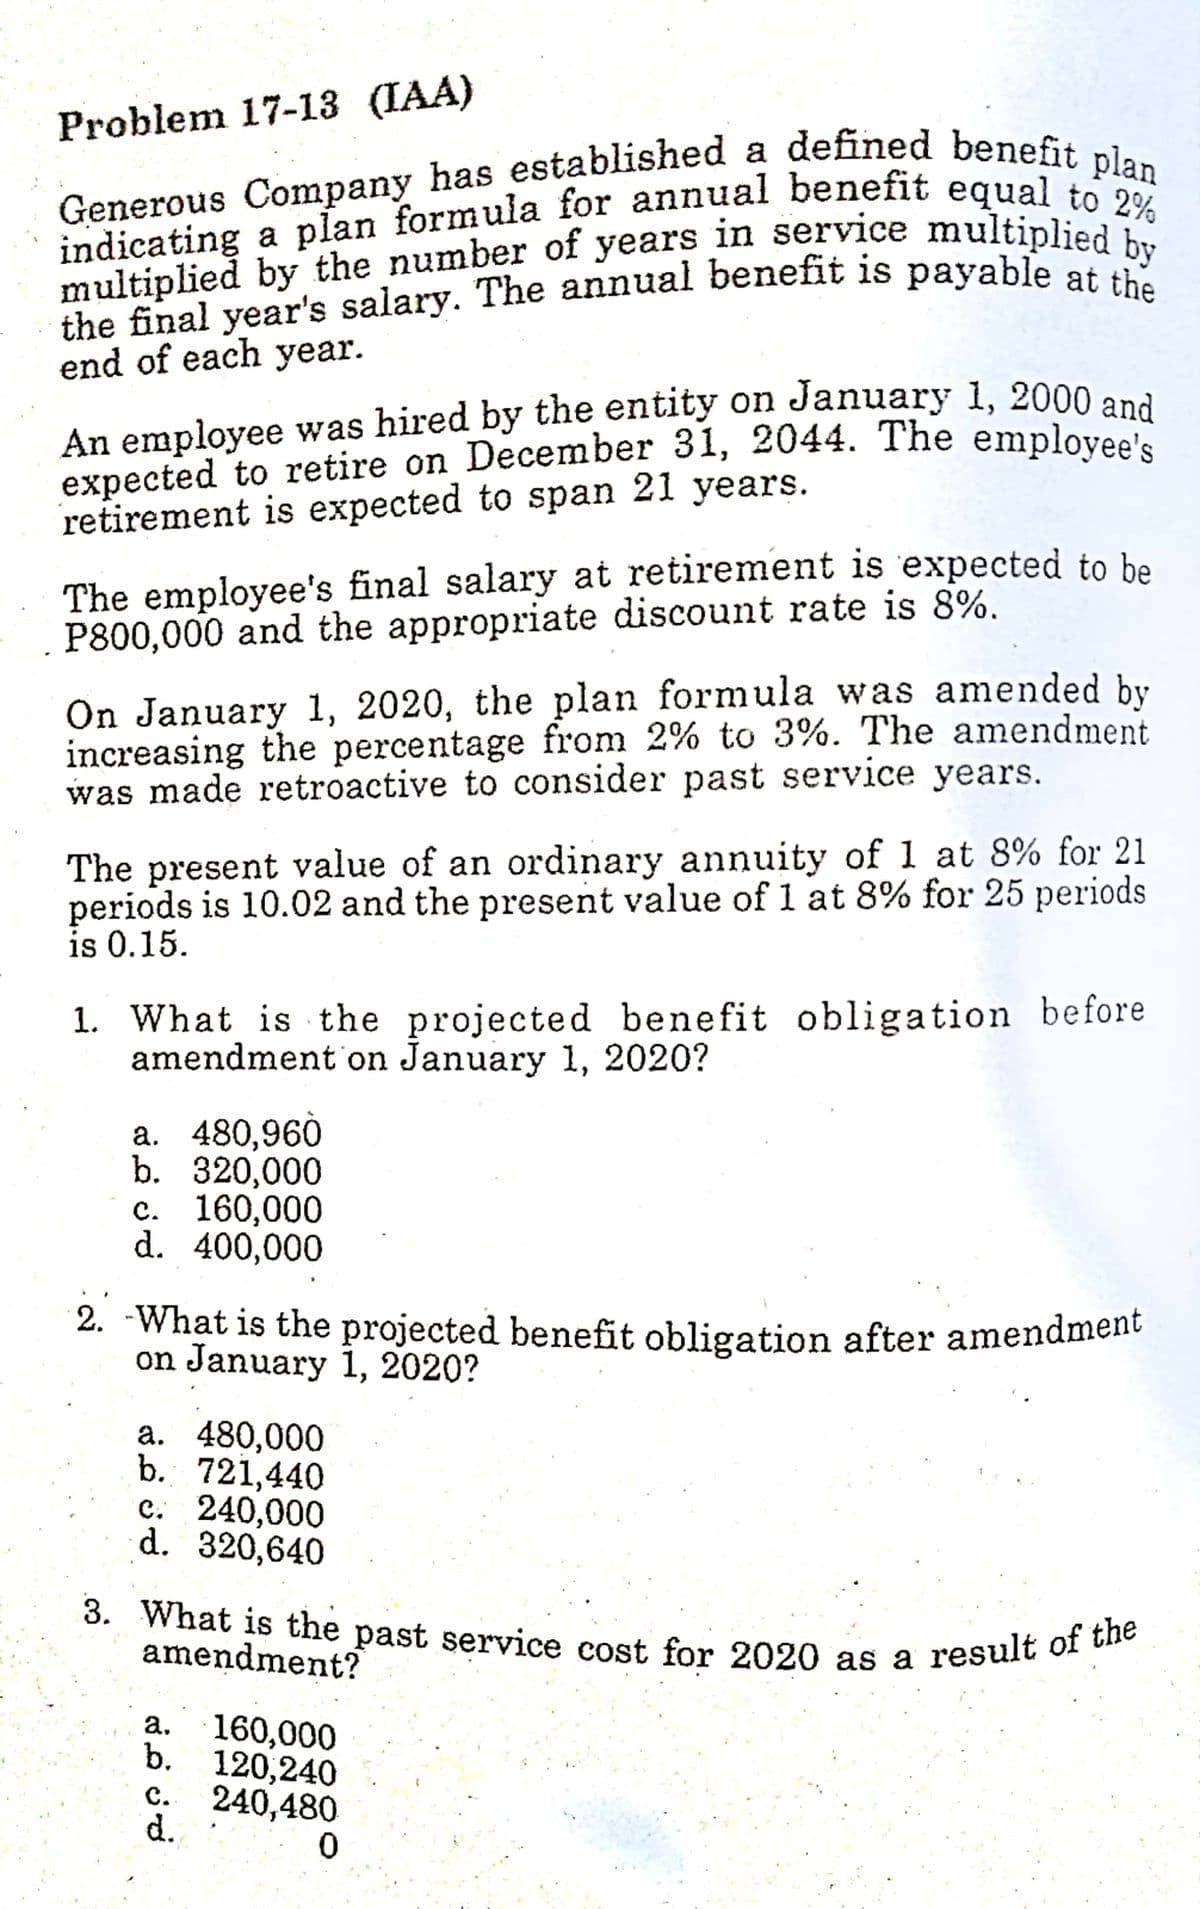 expected to retire on December 31, 2044. The employee's
An employee was hired by the entity on January 1, 2000 and
2. -What is the projected benefit obligation after amendment
3. What is the past service cost for 2020 as a result of the
Problem 17-13 (IAA)
a
end of each year.
retirement is expected to span 21 years.
The employee's final salary at retirement is expected to be
P800,000 and the appropriate discount rate is 8%.
On January 1, 2020, the plan formula was amended by
increasing the percentage from 2% to 3%. The amendment
was made retroactive to consider past service years.
The present value of an ordinary annuity of 1 at 8% for 21
periods is 10.02 and the present value of 1 at 8% for 25 periods
is 0.15.
1. What is the projected benefit obligation before
amendment on January 1, 2020?
a. 480,960
b. 320,000
c. 160,000
d. 400,000
2. -What is the projected benefit obligation after amendment
on January 1, 2020?
a. 480,000
b. 721,440
c. 240,000
d. 320,640
amendment?
160,000
b. 120,240
а.
240,480
d.
с.
